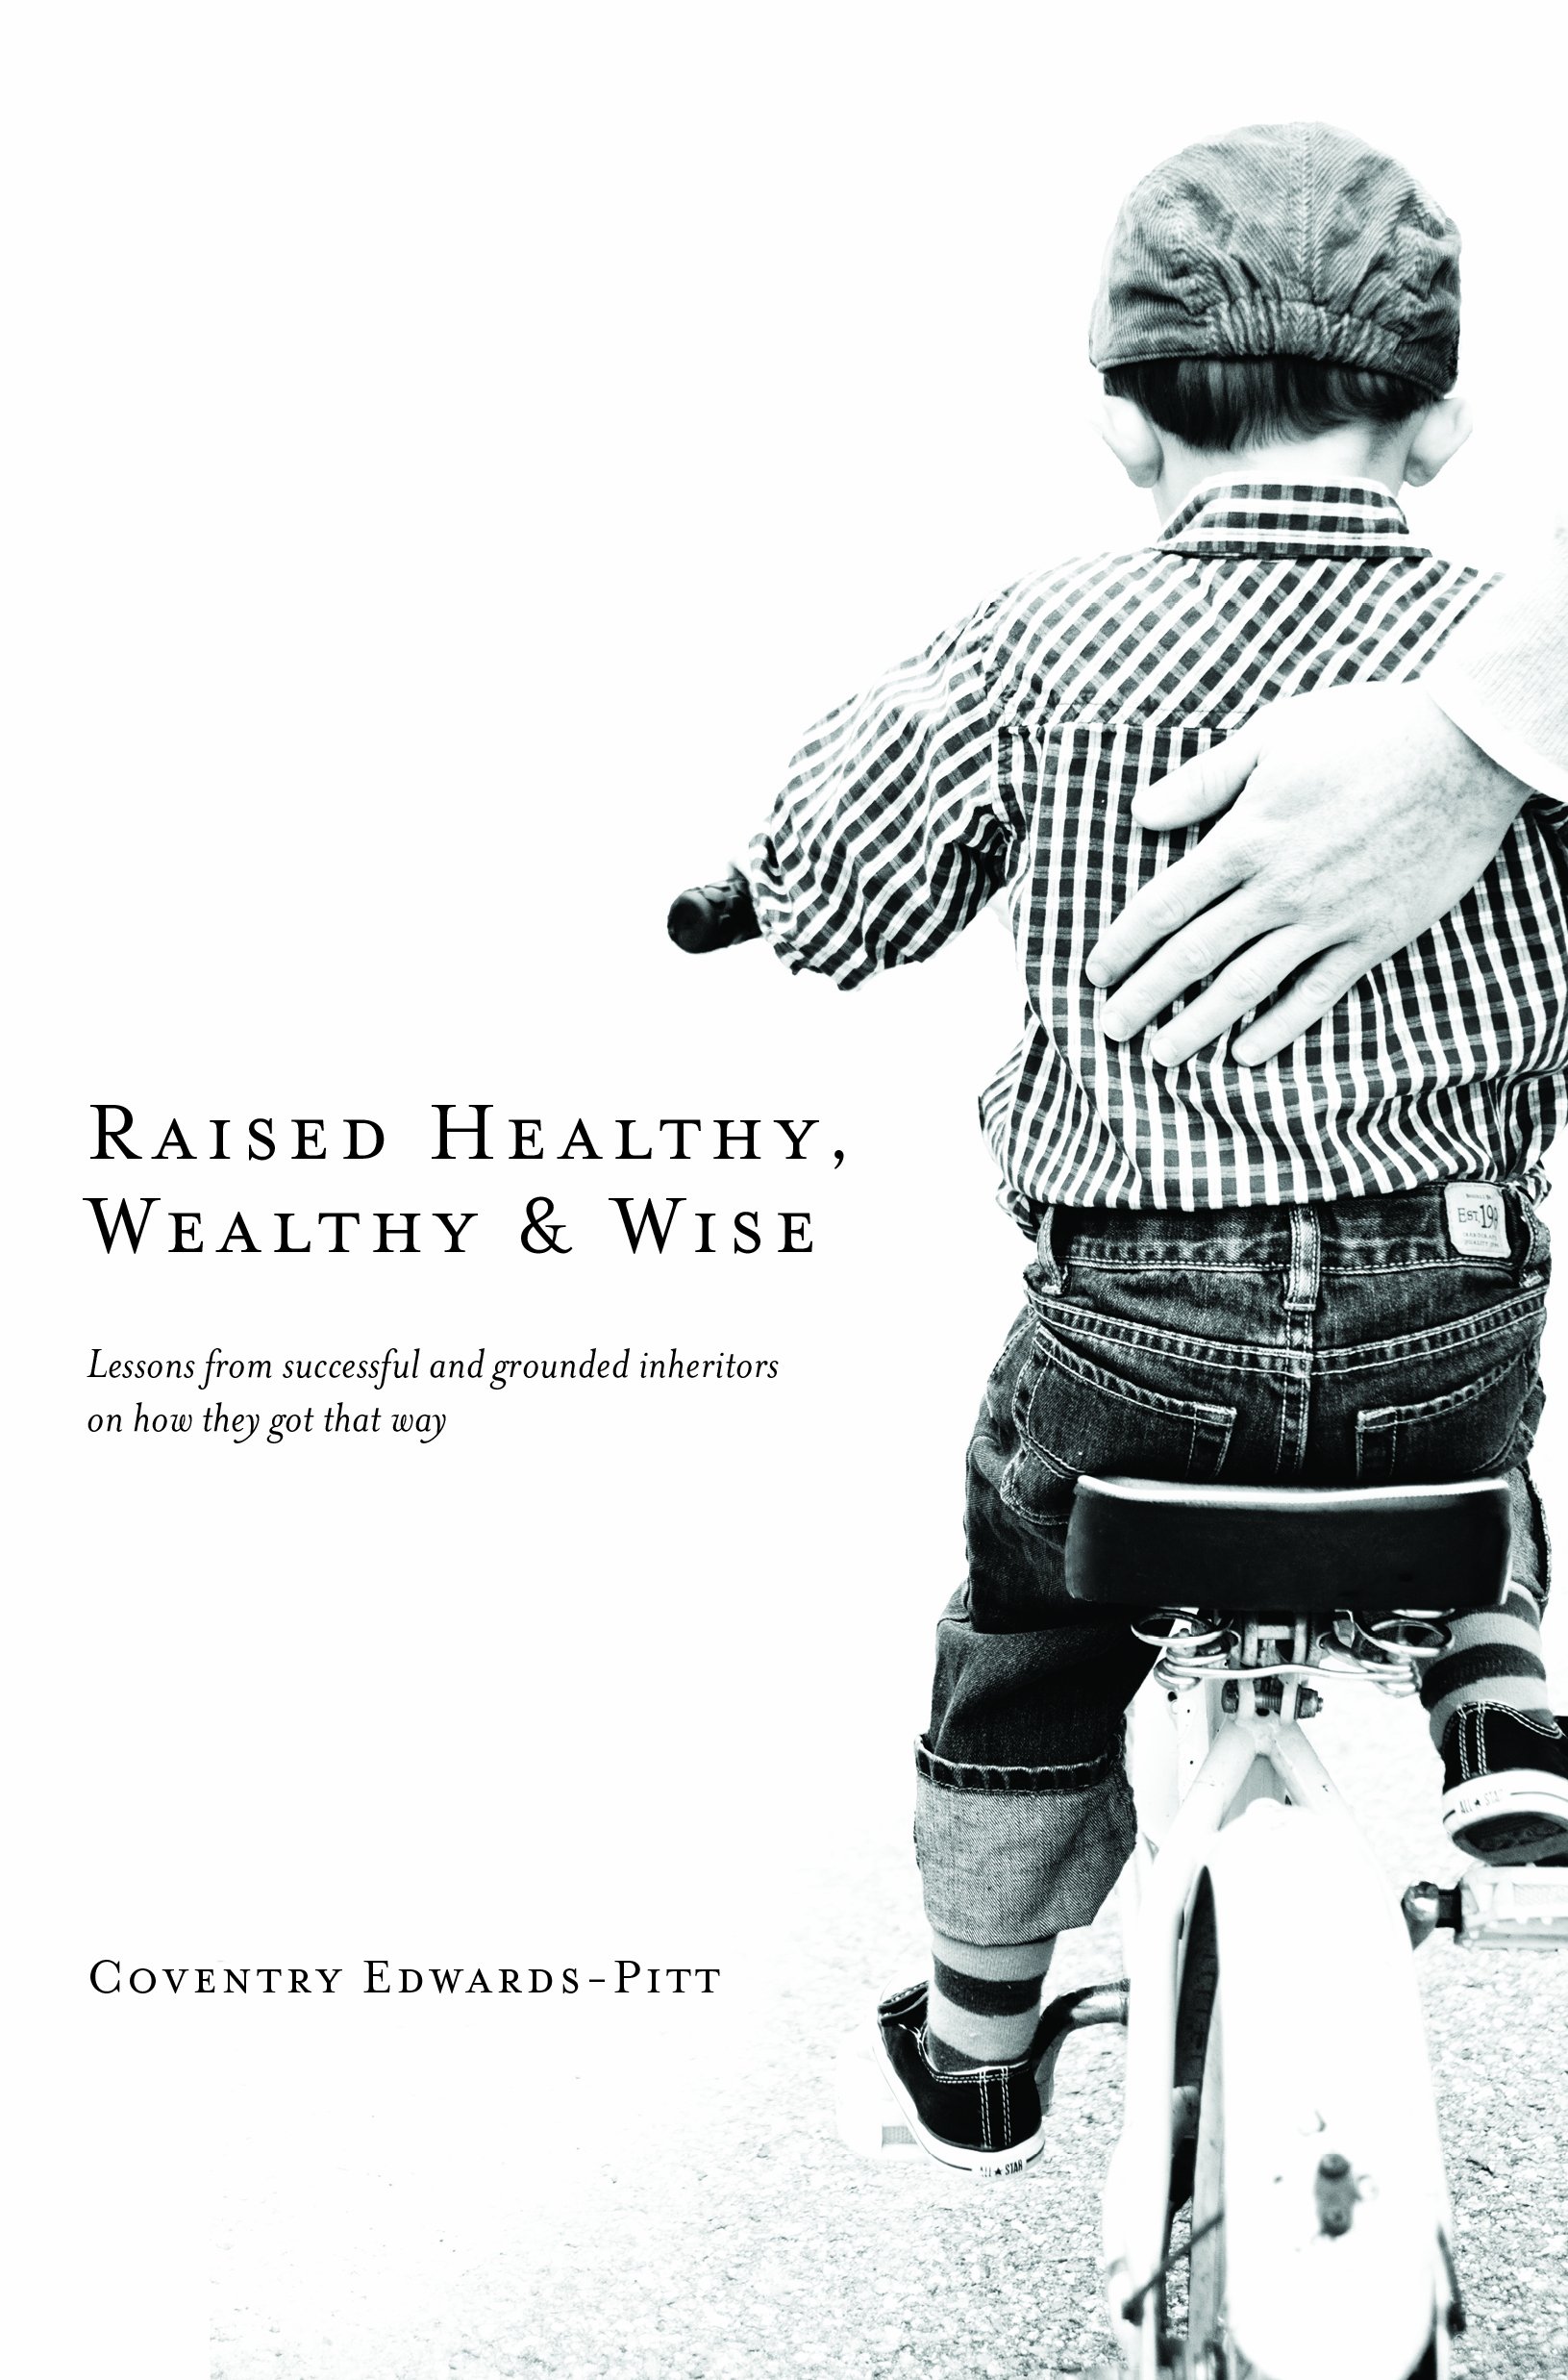 Book cover showing a boy riding a bicycle with an adult's hand on his back, Family Wealth Report